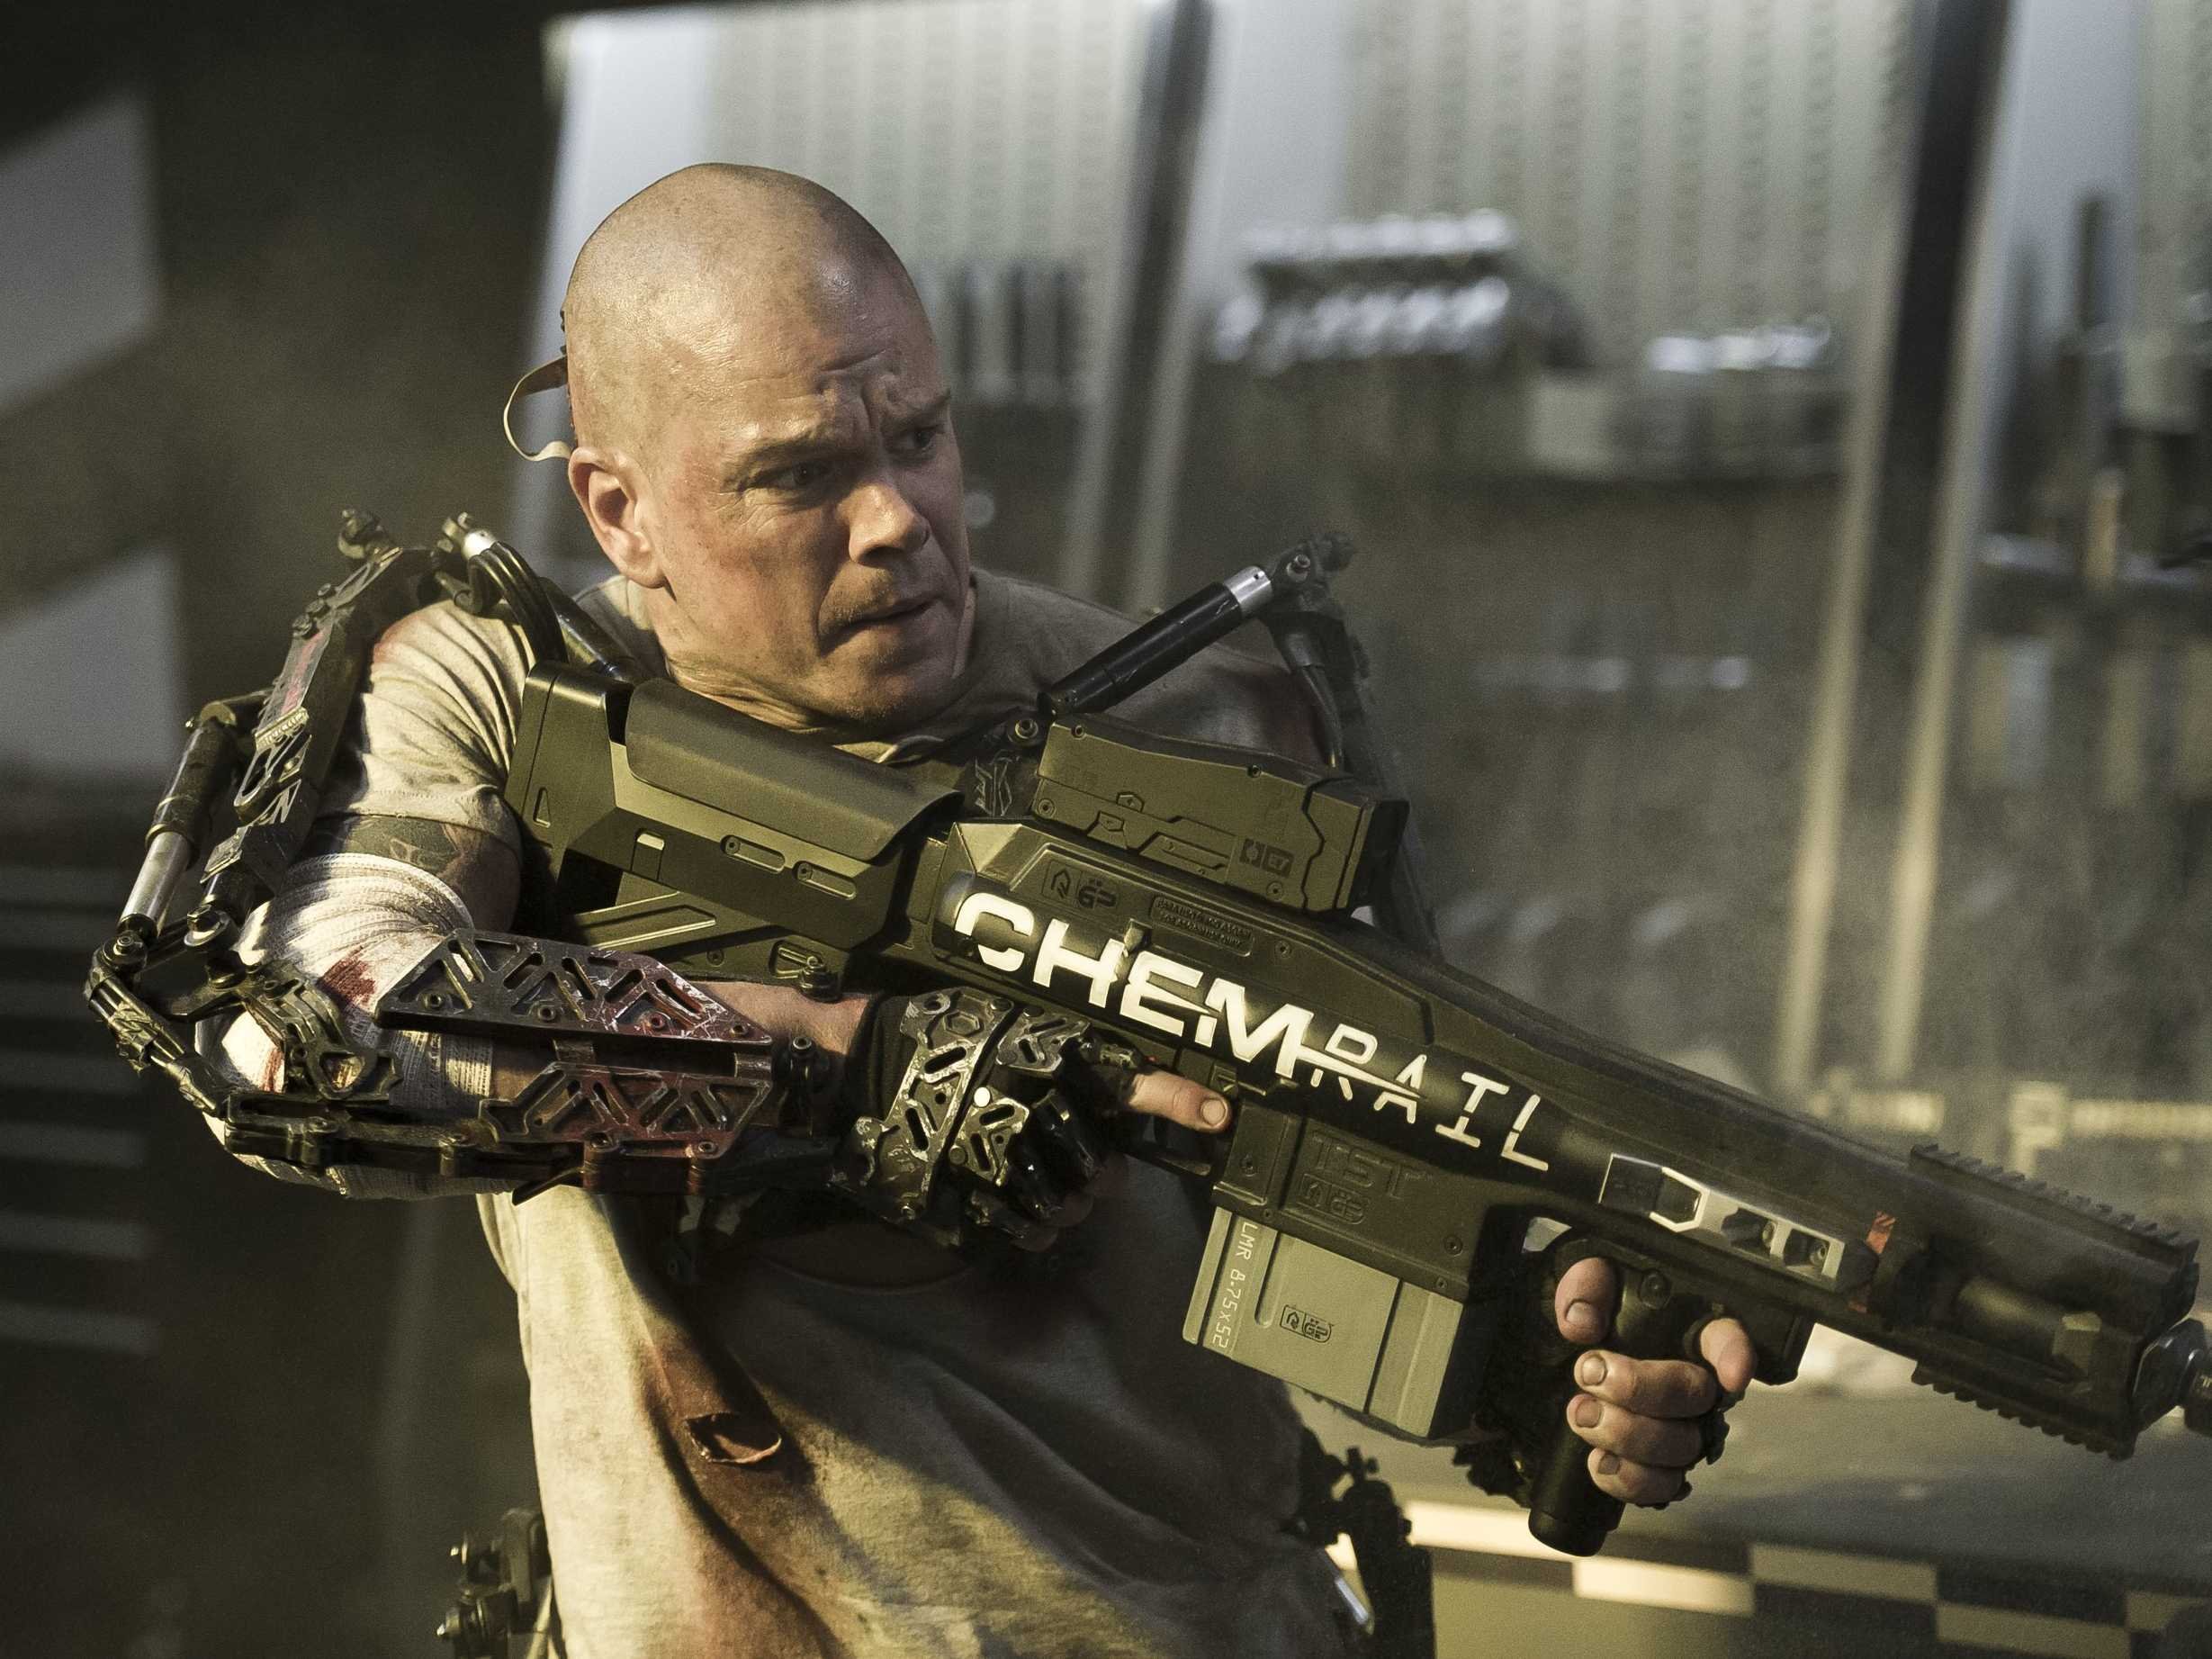 Matt Damon on storms the castle in Elysium, opening this weekend.